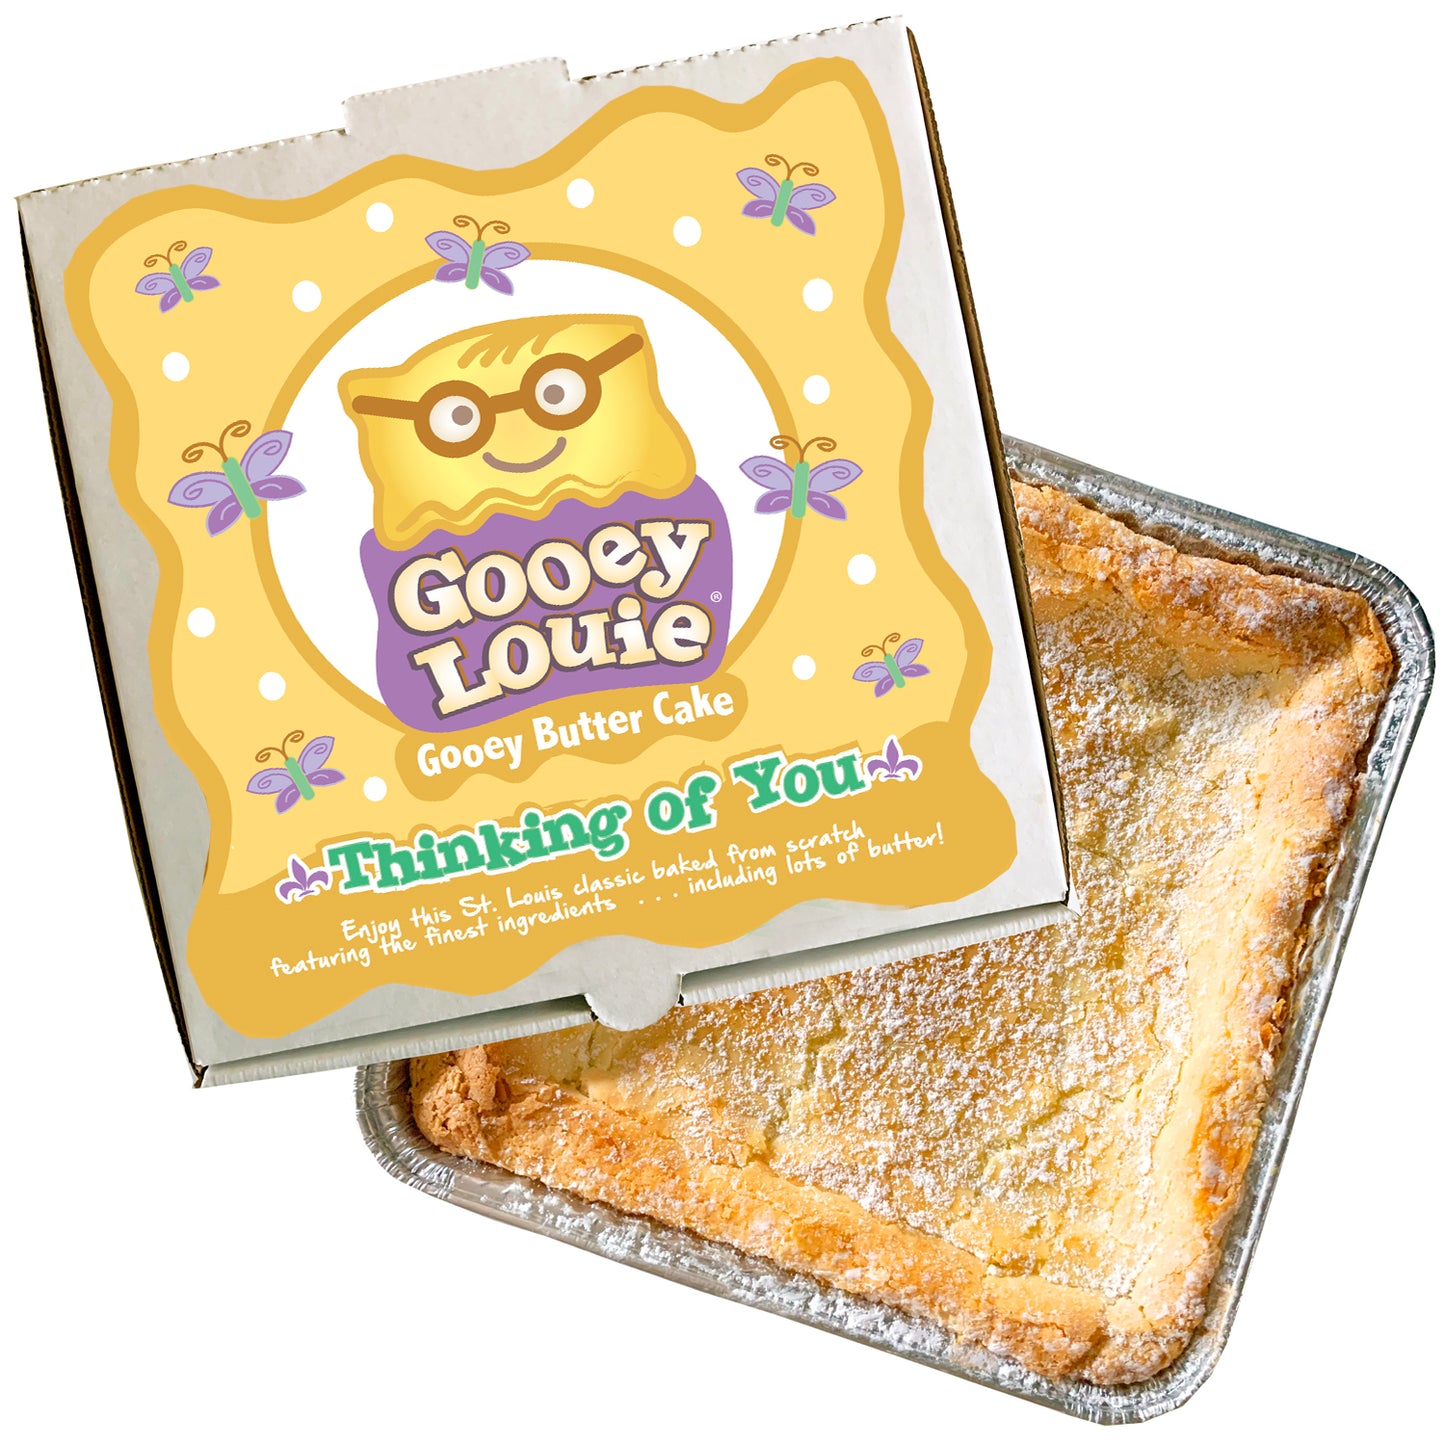 THINKING OF YOU Gooey Louie Gift Box– Gooey Butter Cake LOCAL PICKUP